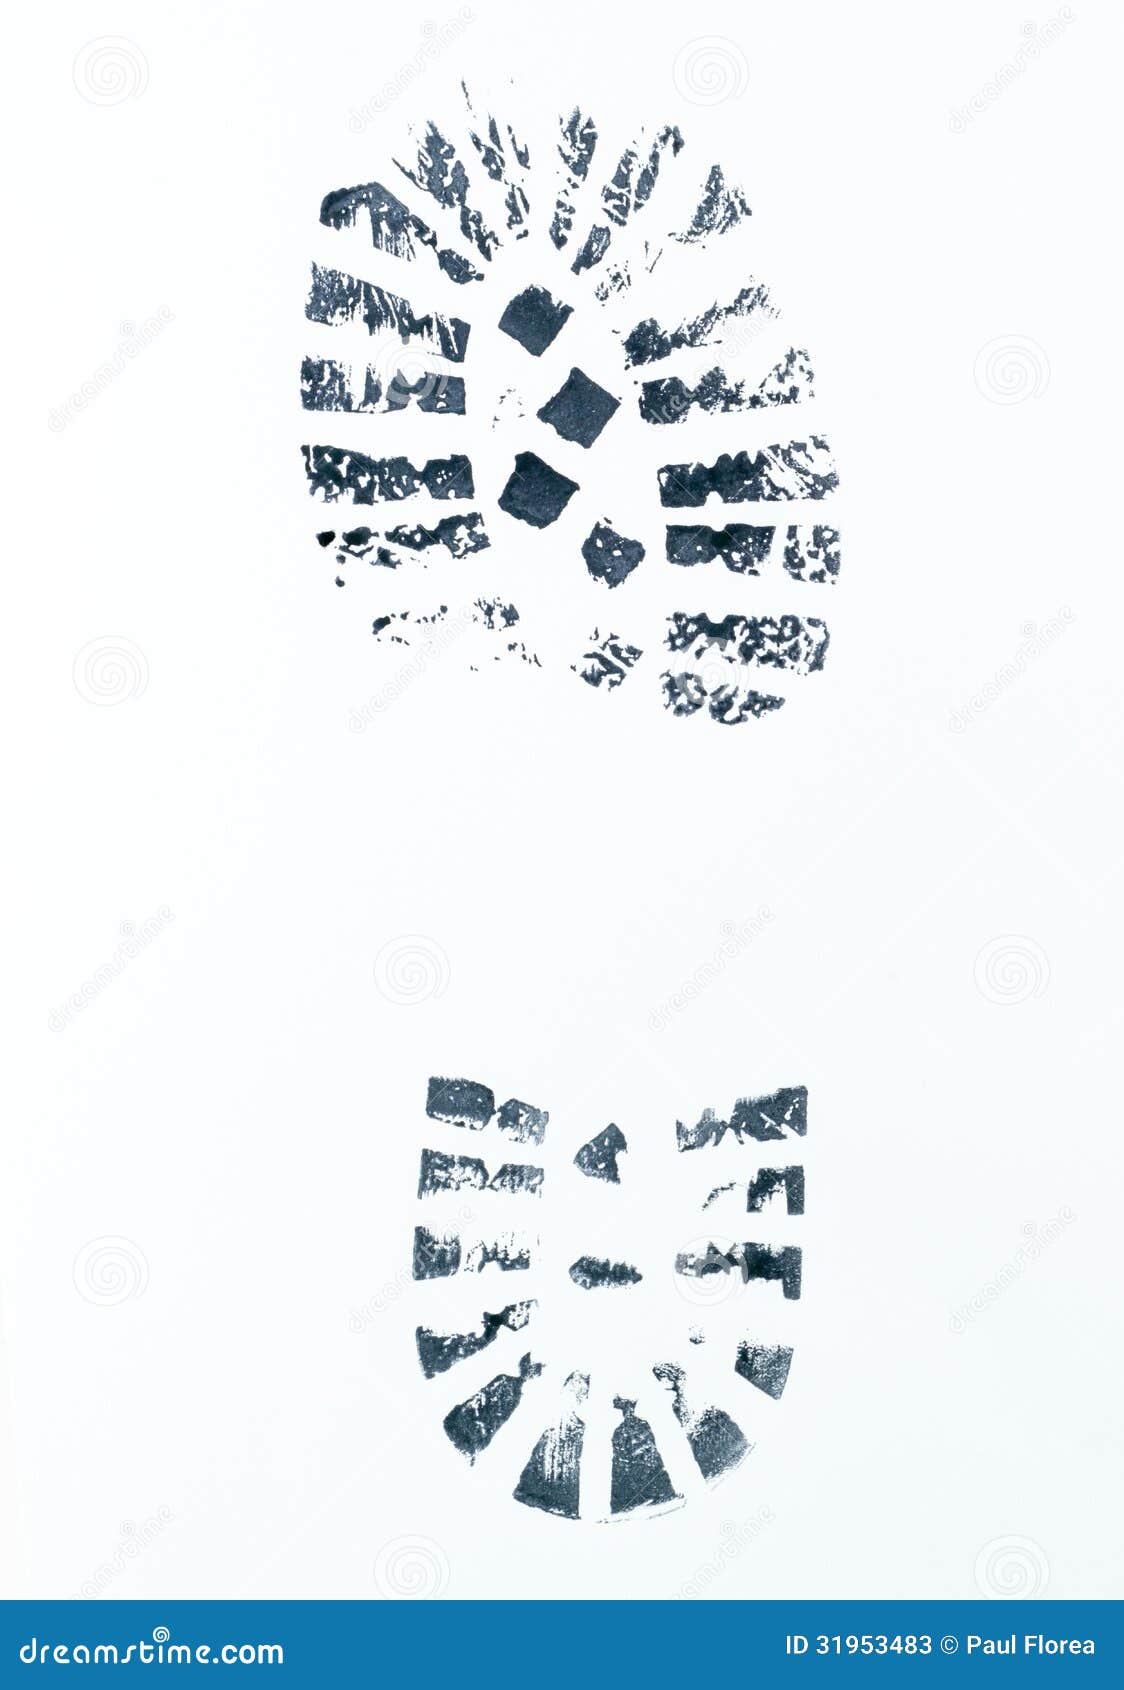 image of a right boot print